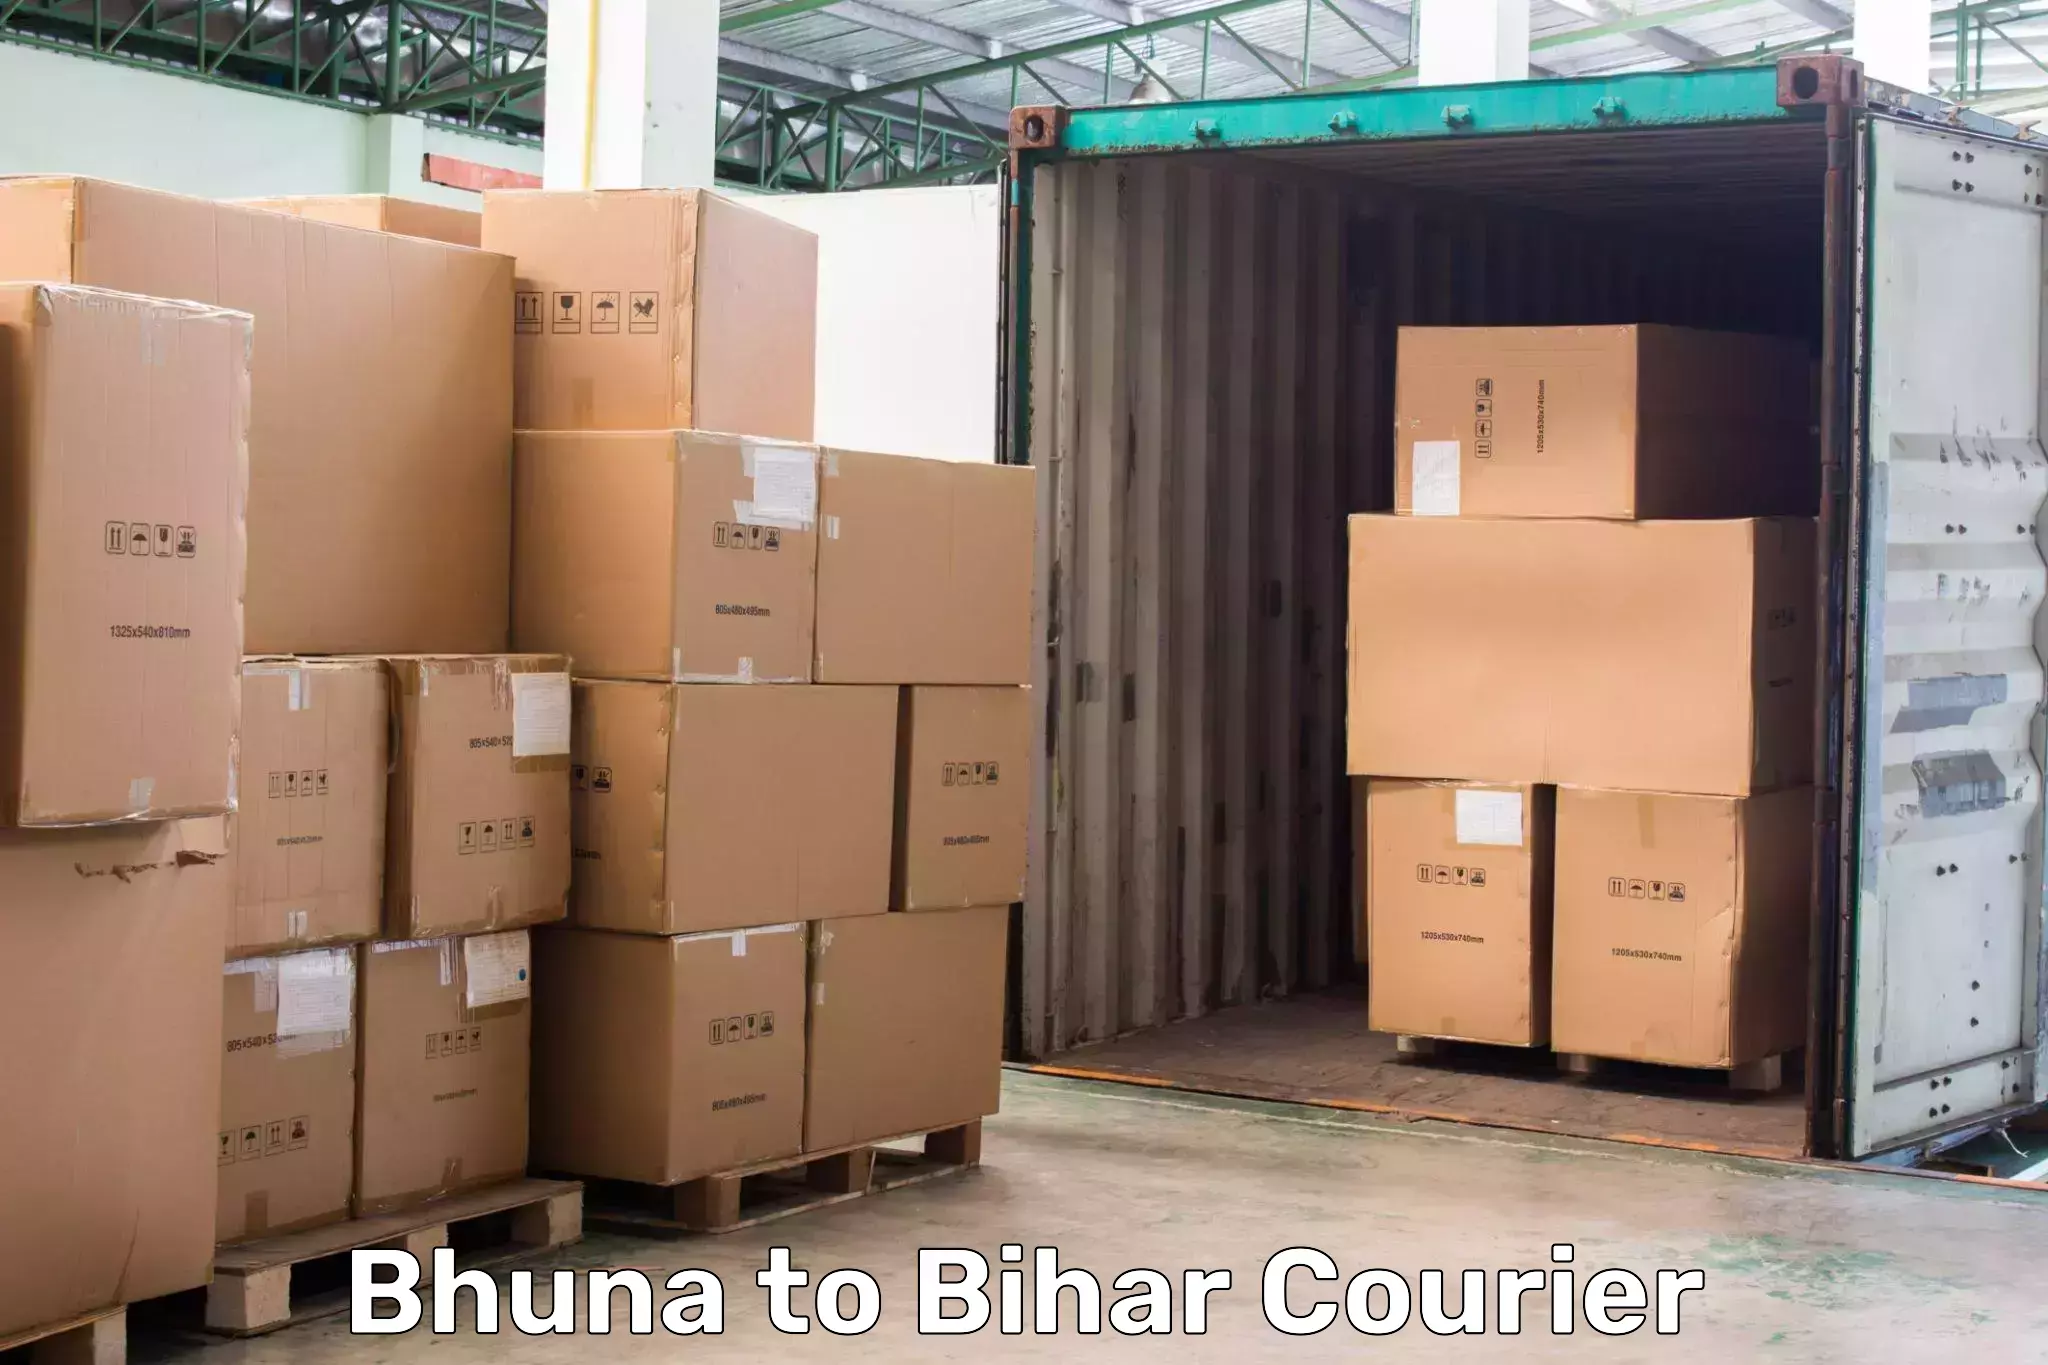 Cash on delivery service Bhuna to Bihar